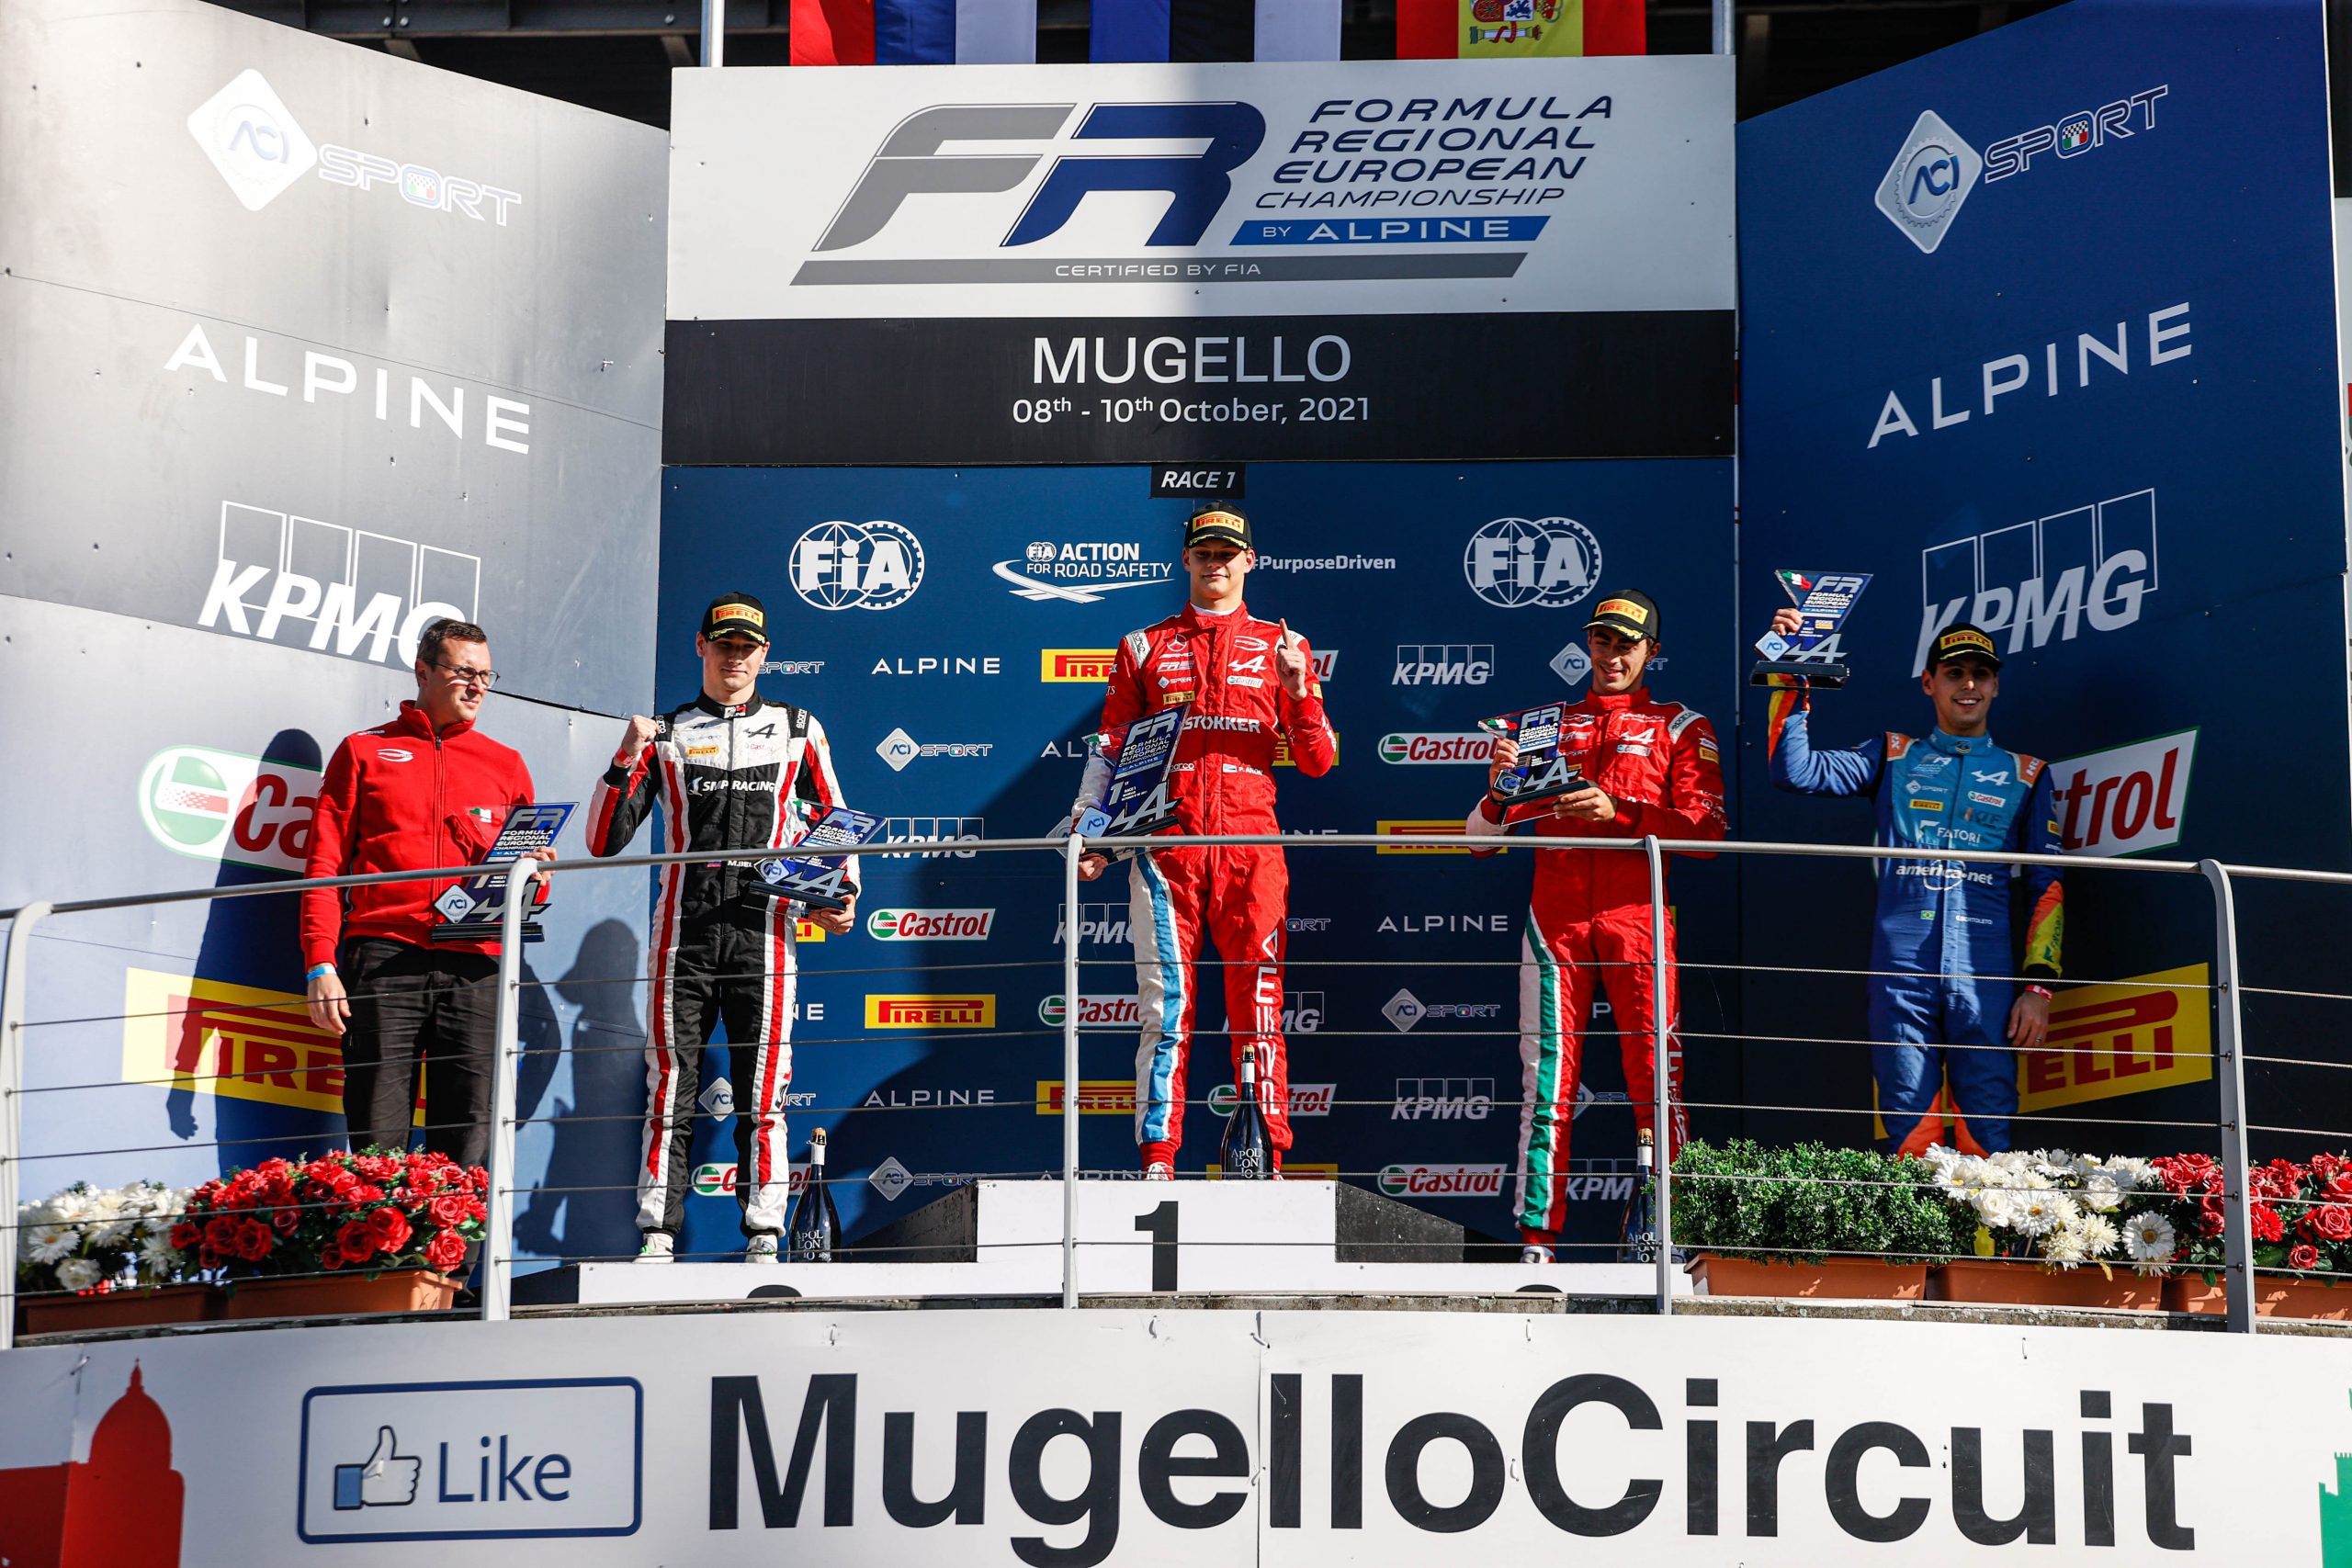 G4 Racing takes second place at Mugello